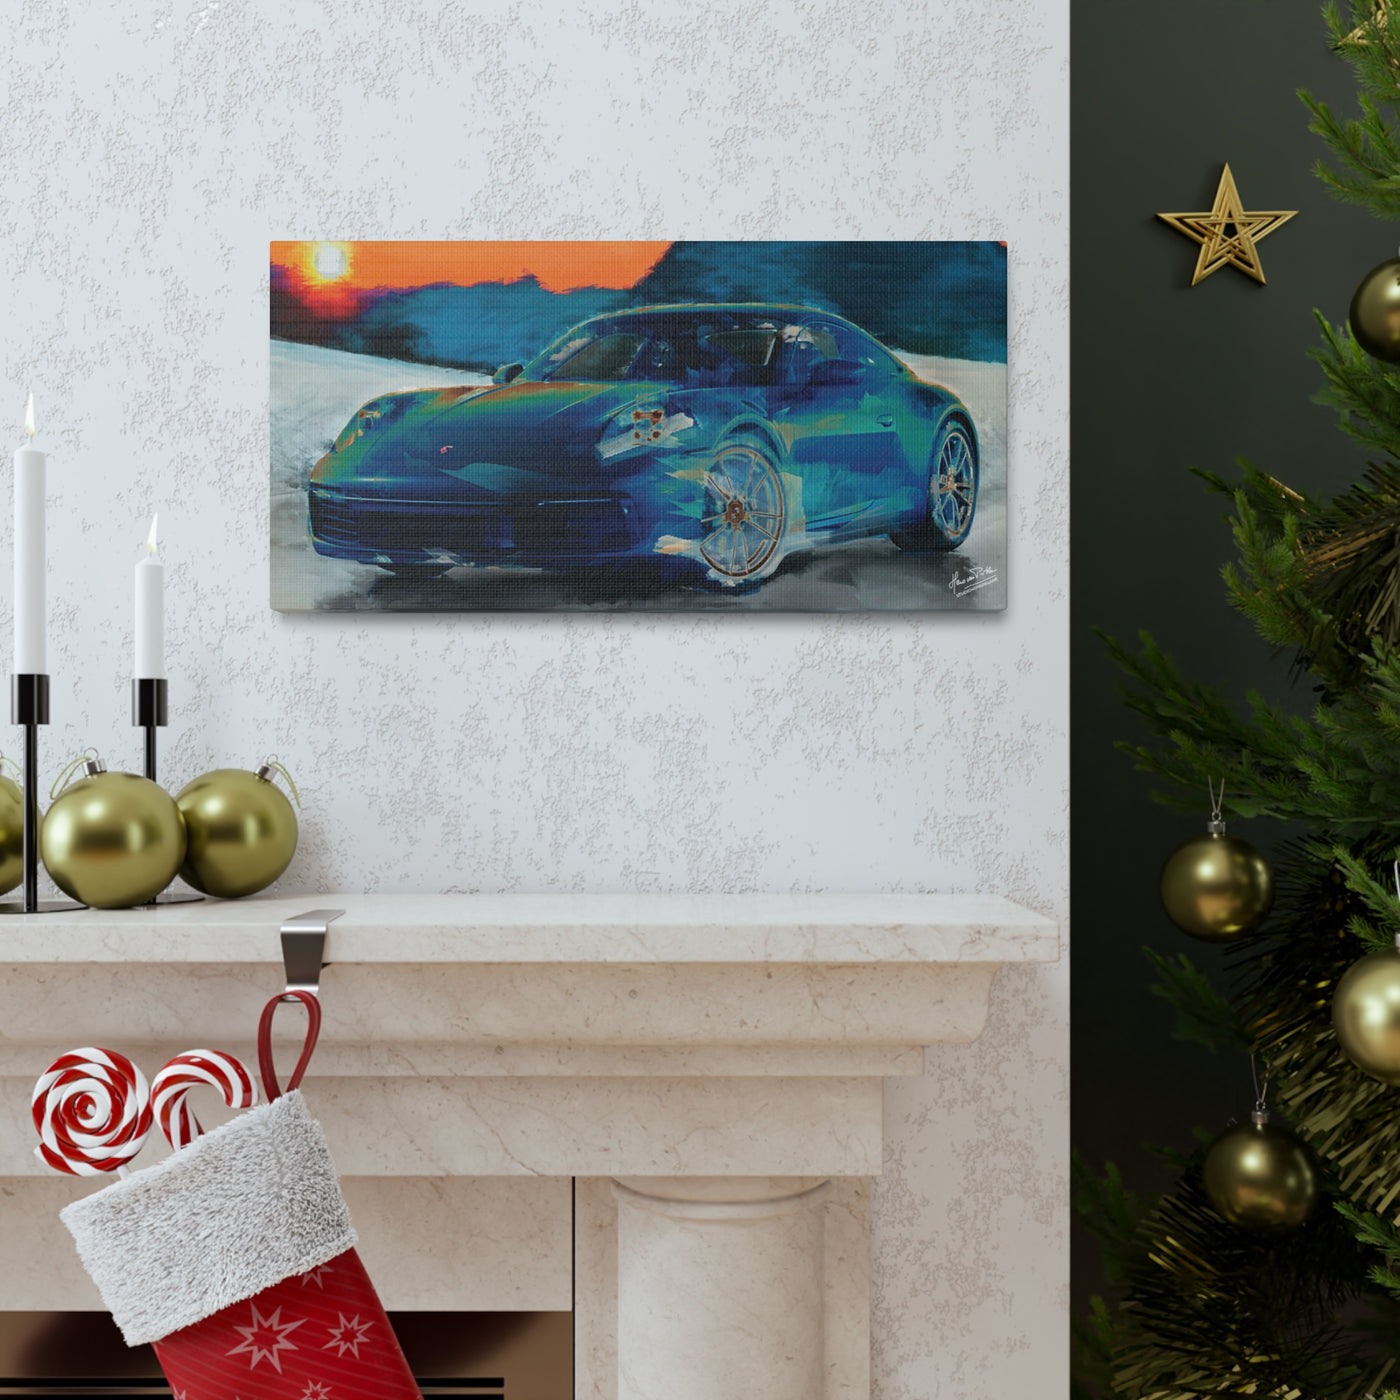 Porsche Wall Art on Canvas Print Gallery Wrapped - Gorgeous Porsche 911 Carrera Wall Art - Set in the mountains with a Sunset - Home Decor